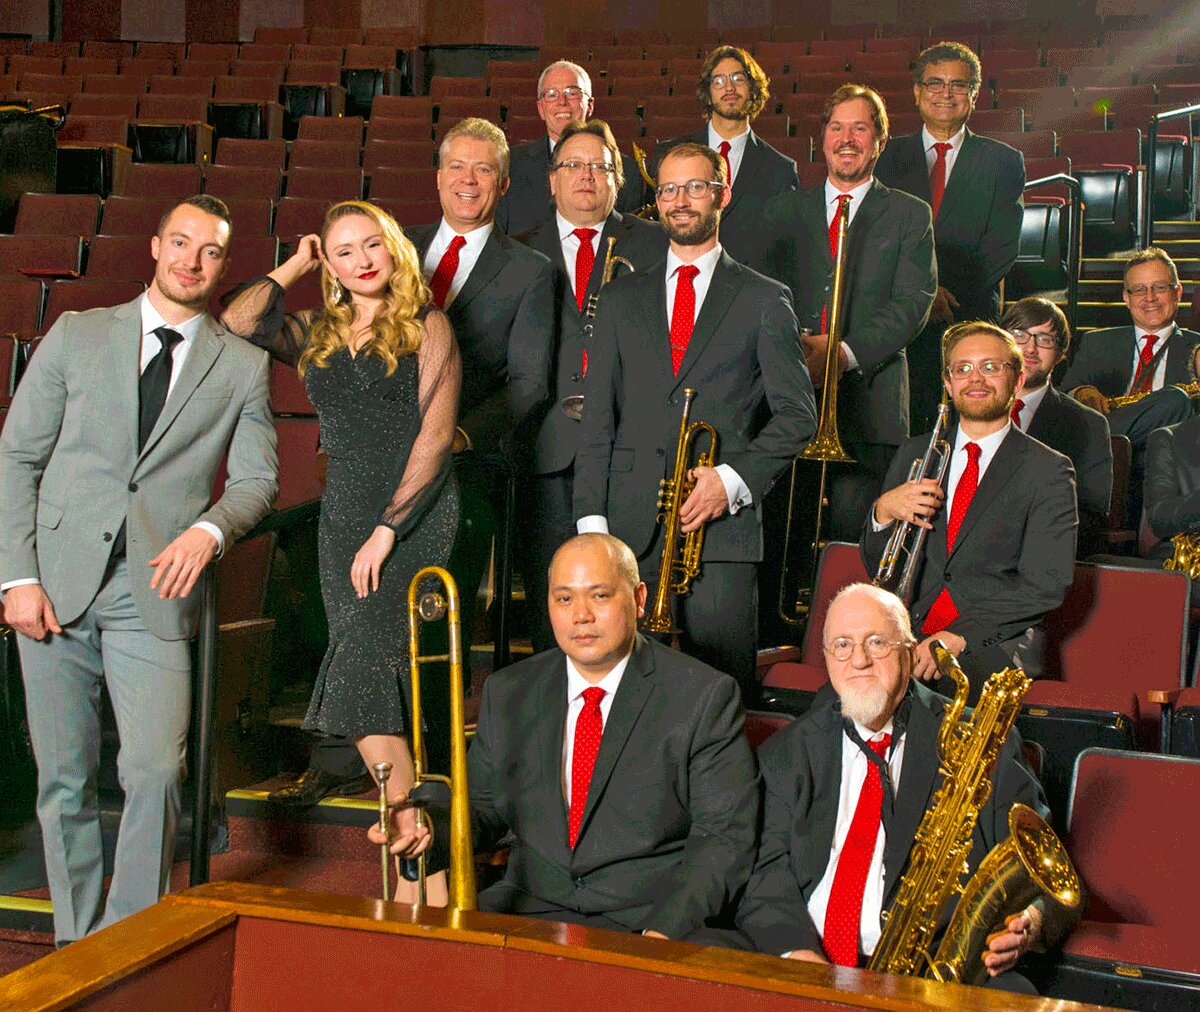 The Glenn Miller Orchestra will perform at Sacred Heart Church on Dec. 21. SeaComm photo submitted by Jerry Manor.